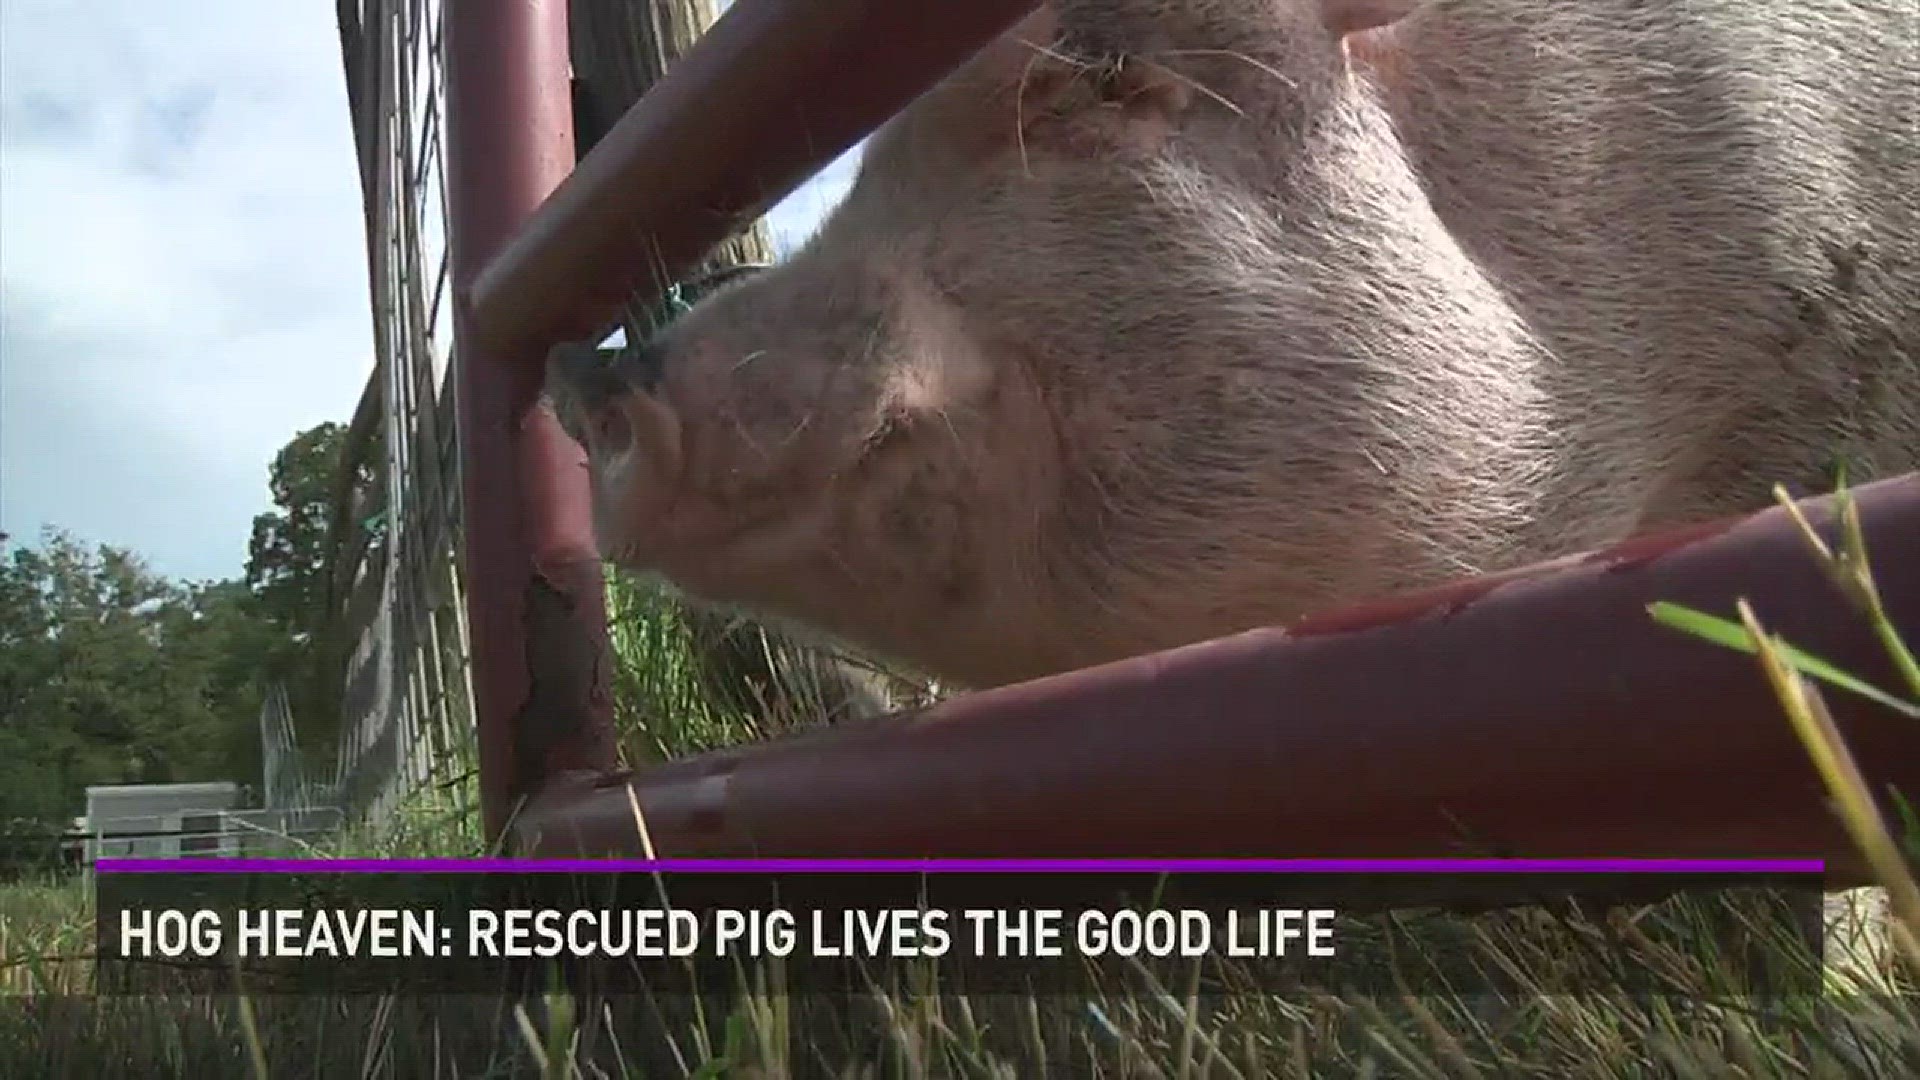 Dandy the pig was rescued from neglect. We meet his owner and learn about his new life.